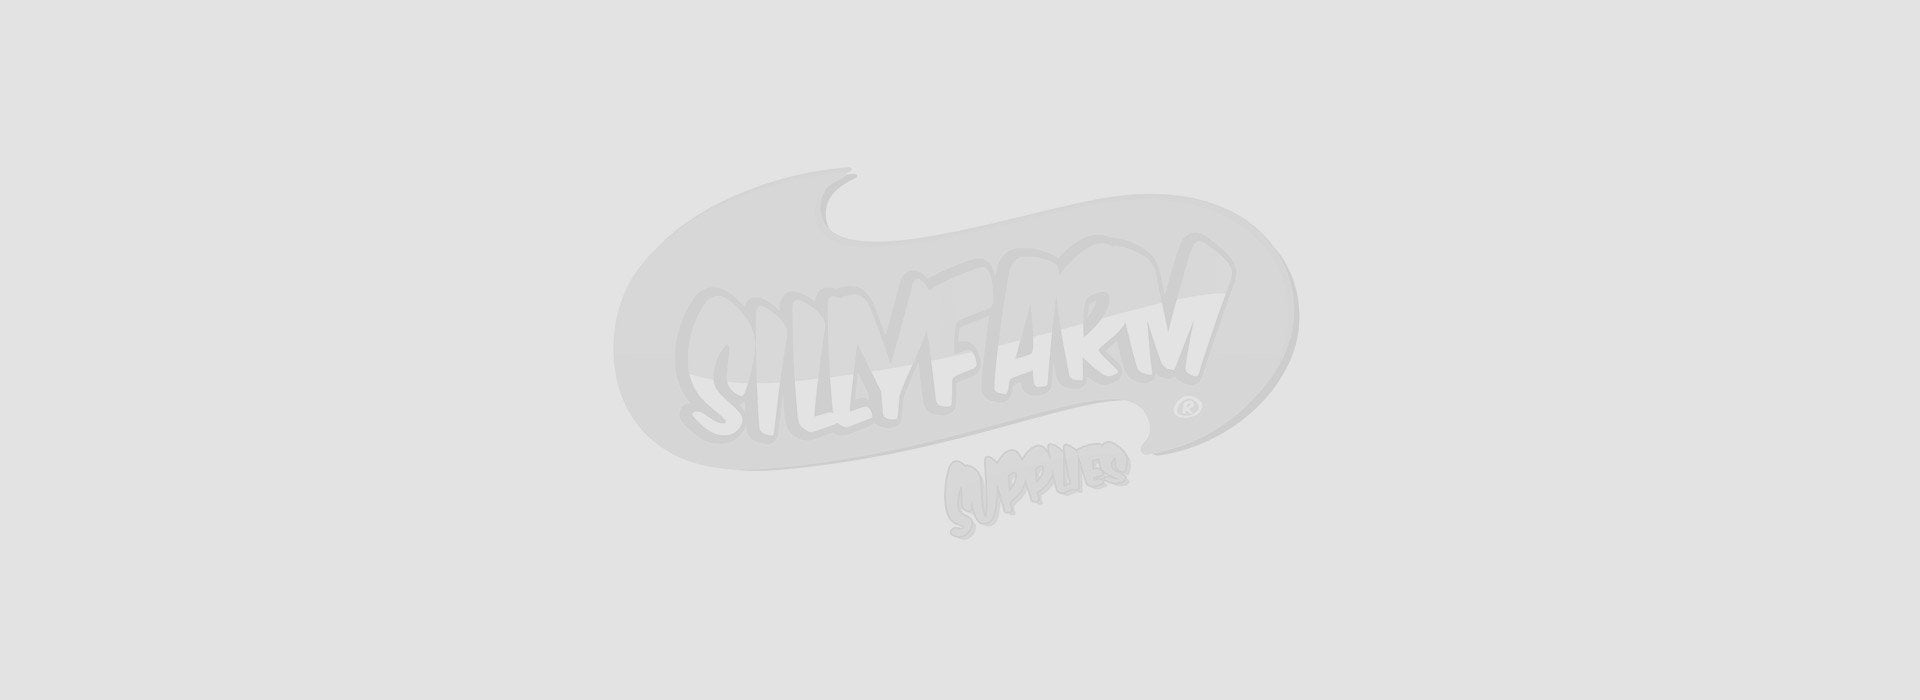 Images Upload Collection | Silly Farm Supplies